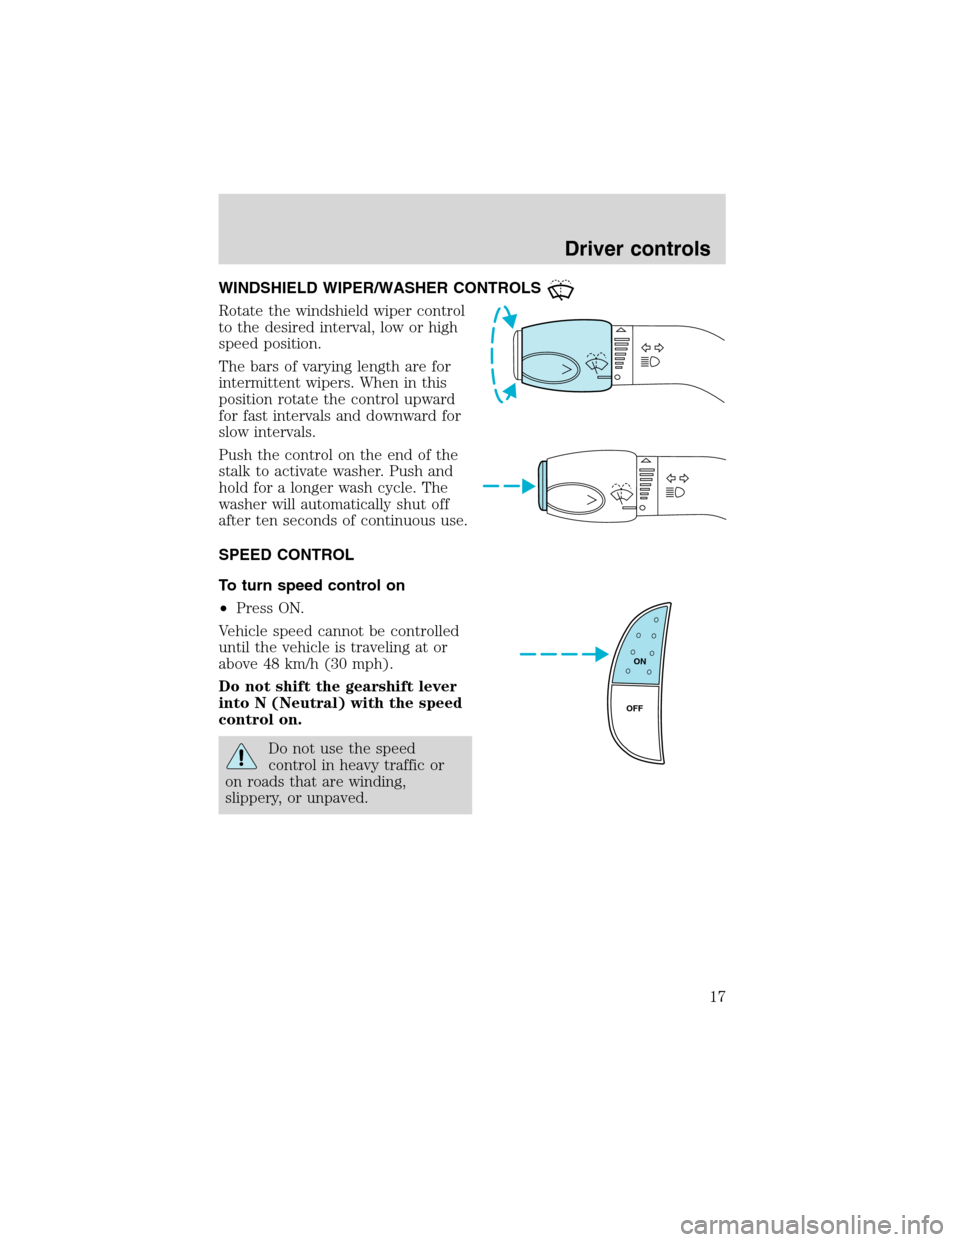 FORD F SERIES MOTORHOME AND COMMERCIAL CHASSIS 2002 10.G User Guide WINDSHIELD WIPER/WASHER CONTROLS
Rotate the windshield wiper control
to the desired interval, low or high
speed position.
The bars of varying length are for
intermittent wipers. When in this
position 